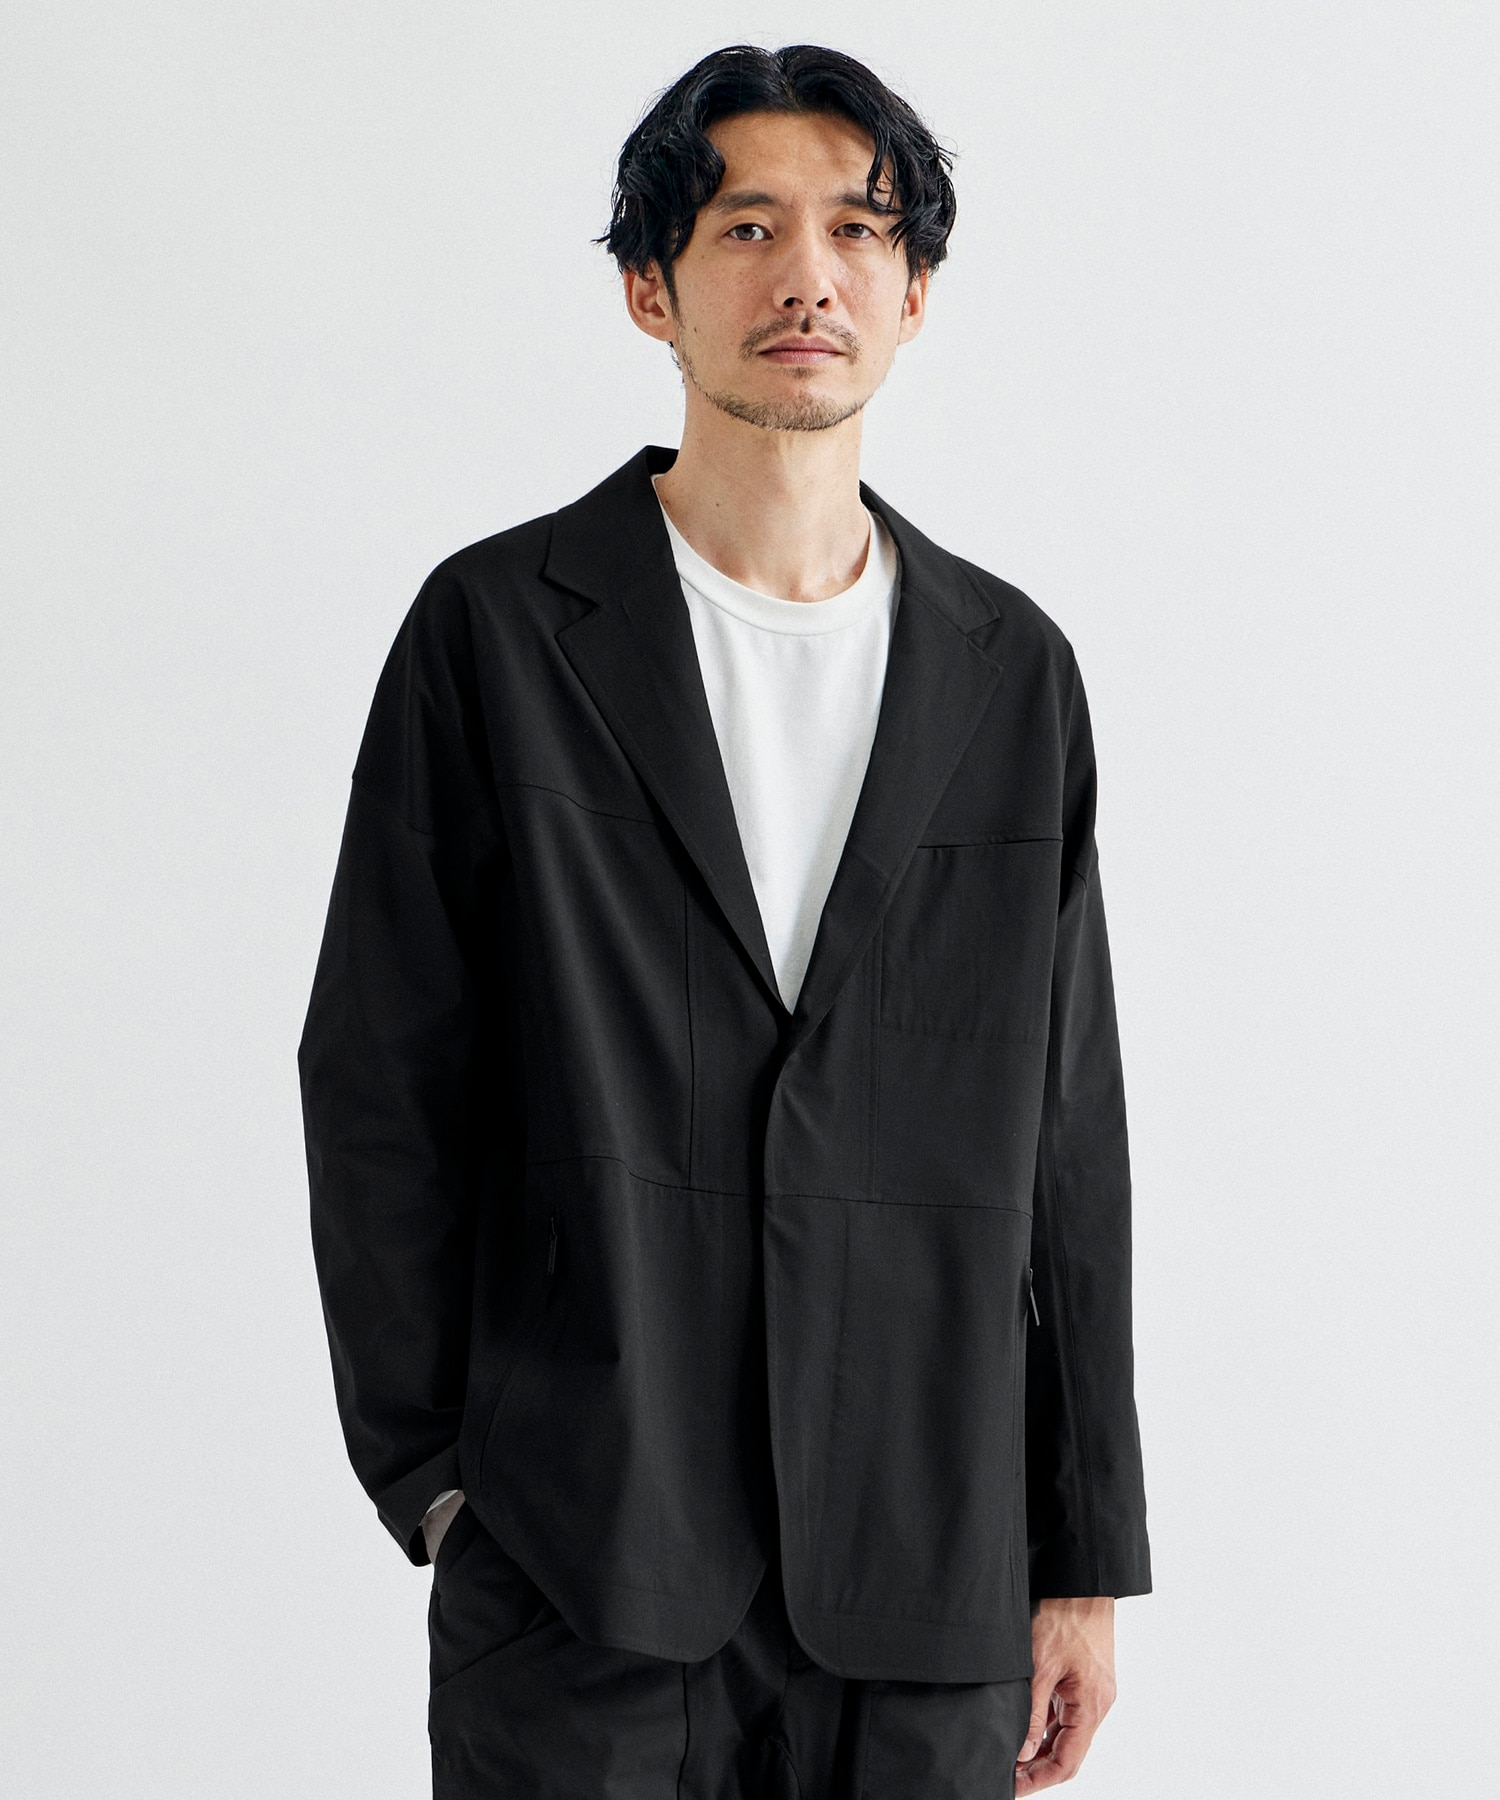 NEW ARRIVAL: MENS｜THE TOKYO ONLINE STORE